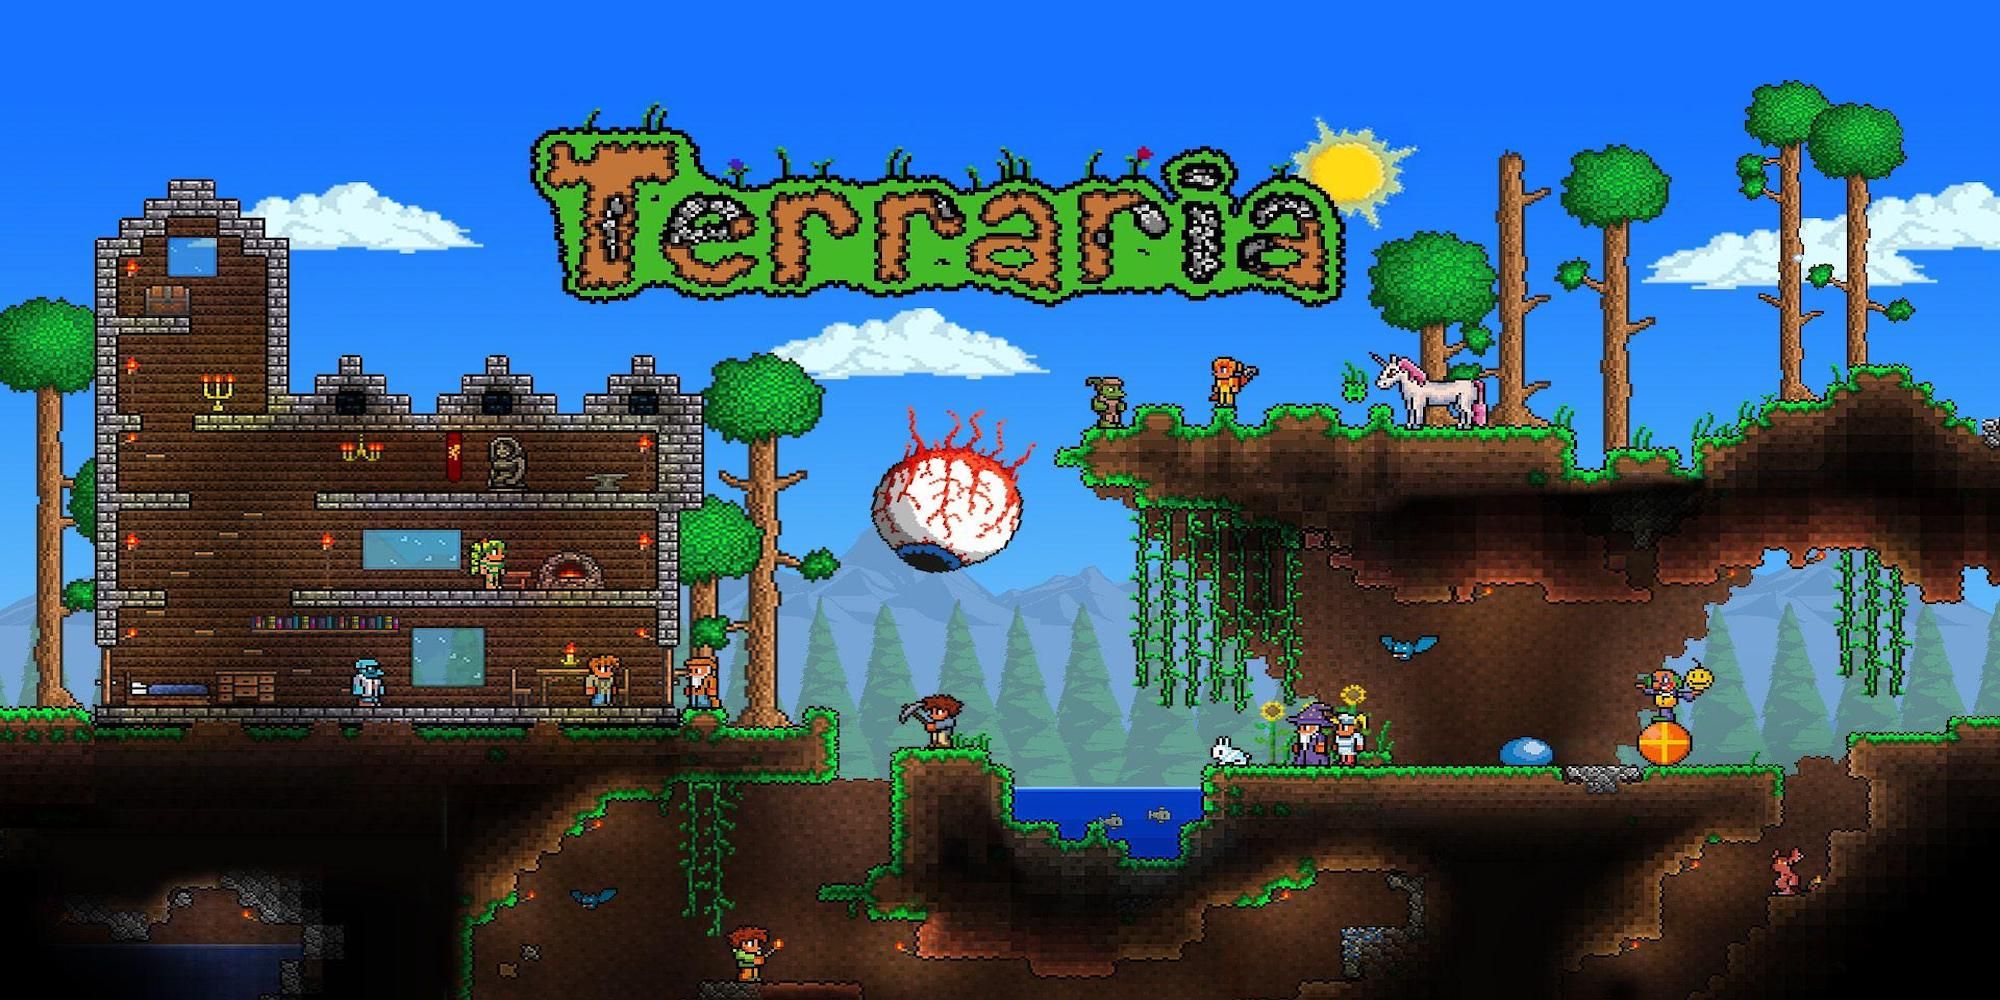 Promo art featuring the world from Terraria